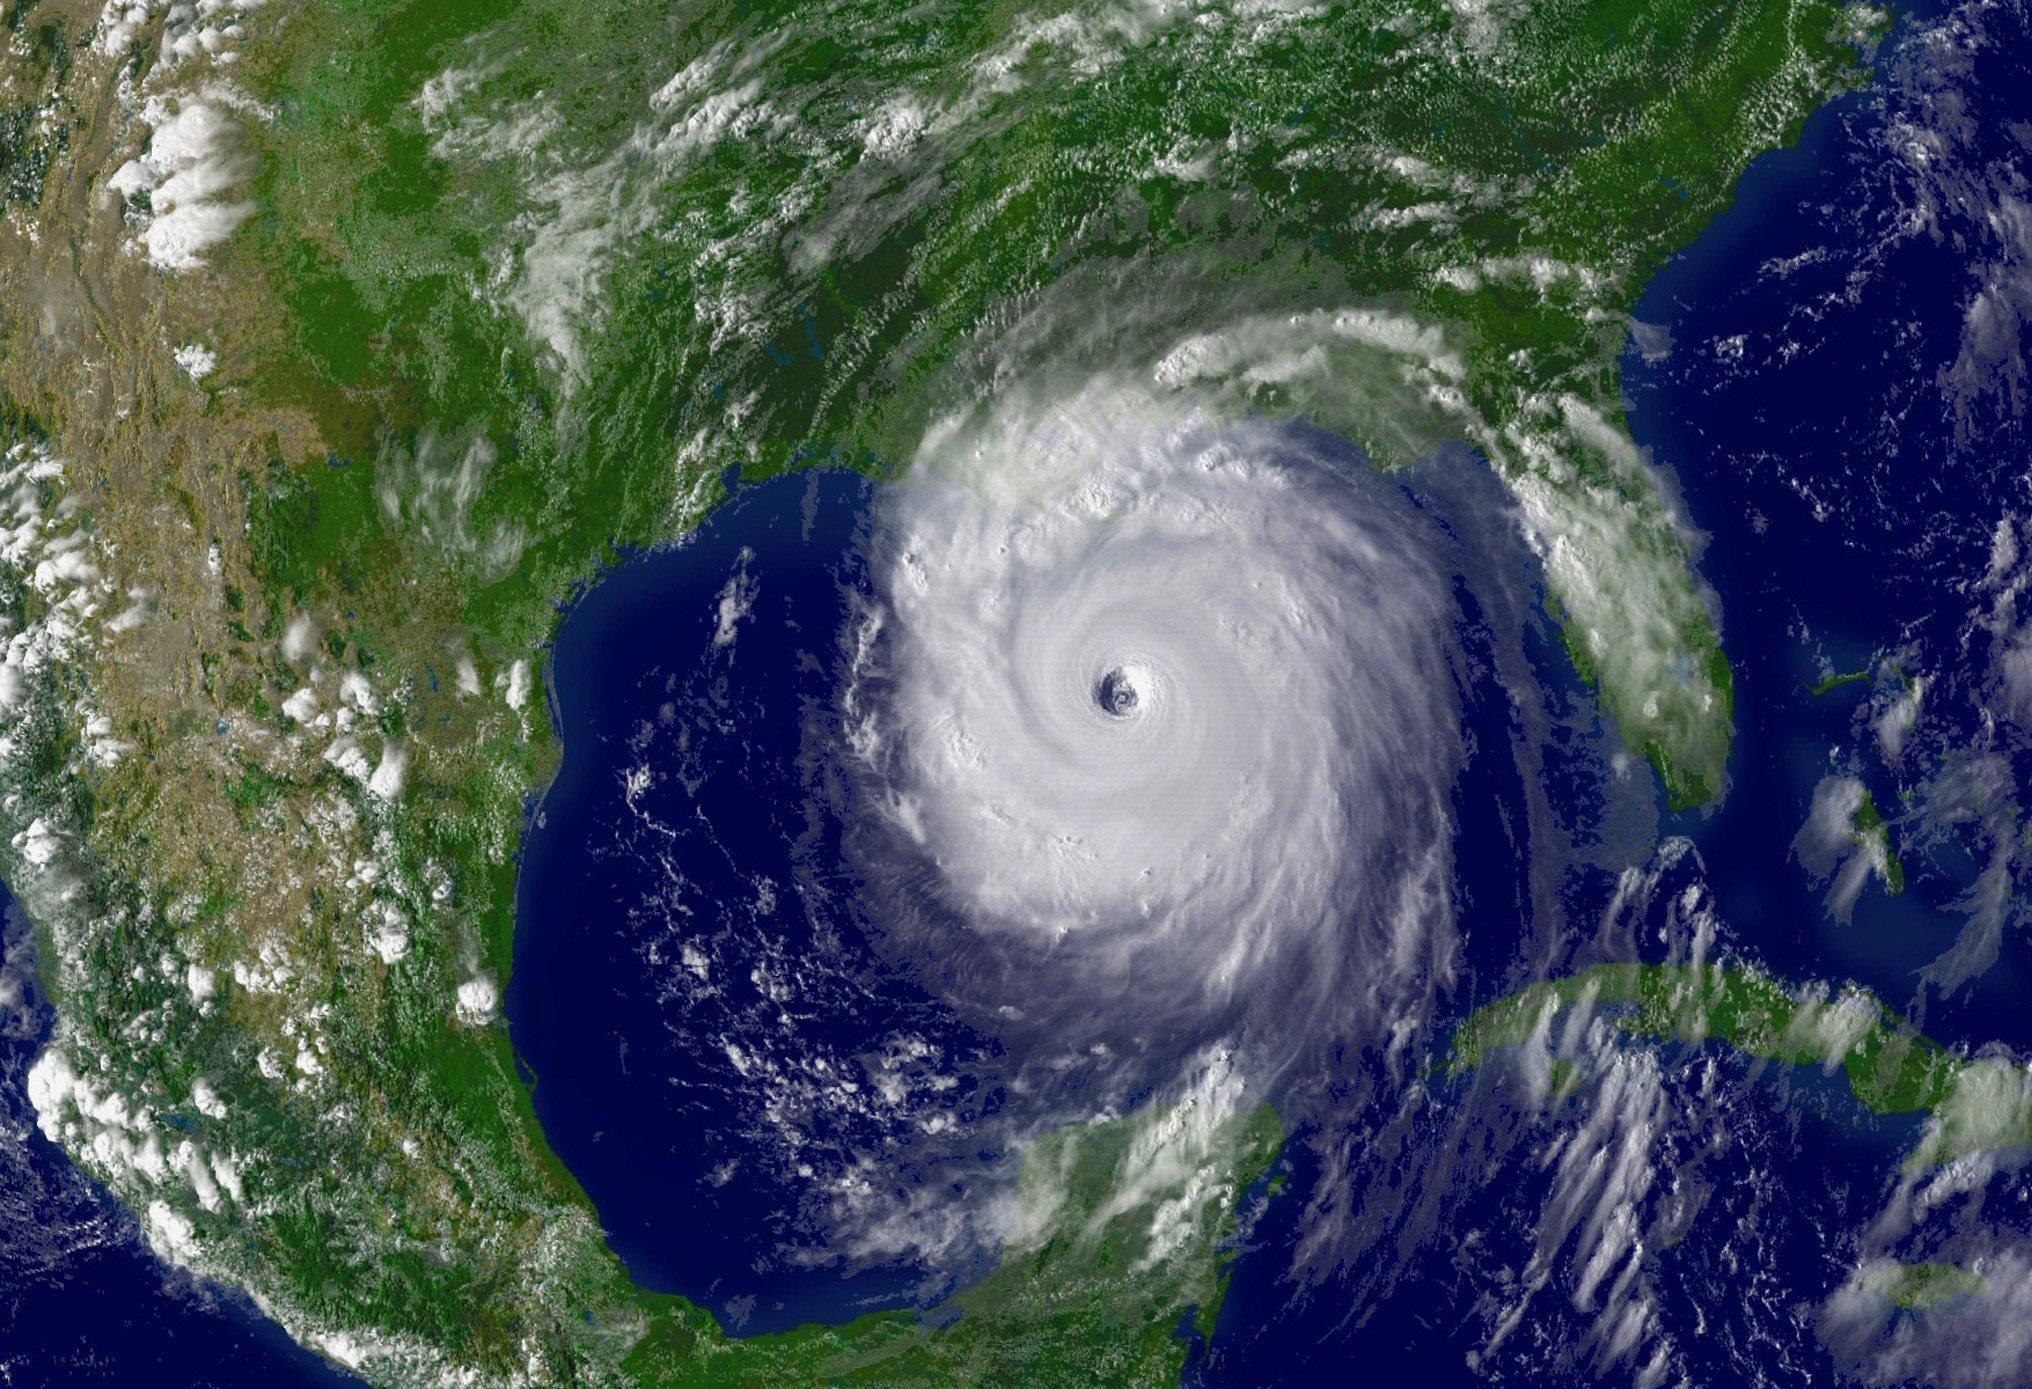 Studies show that hurricanes with female names kill more people than hurricanes with male names because people don't think female-named hurricanes will be as deadly. (<a href="http://ebaum.it/1mNFxXe" target="_blank">National Academy of Sciences</a>)